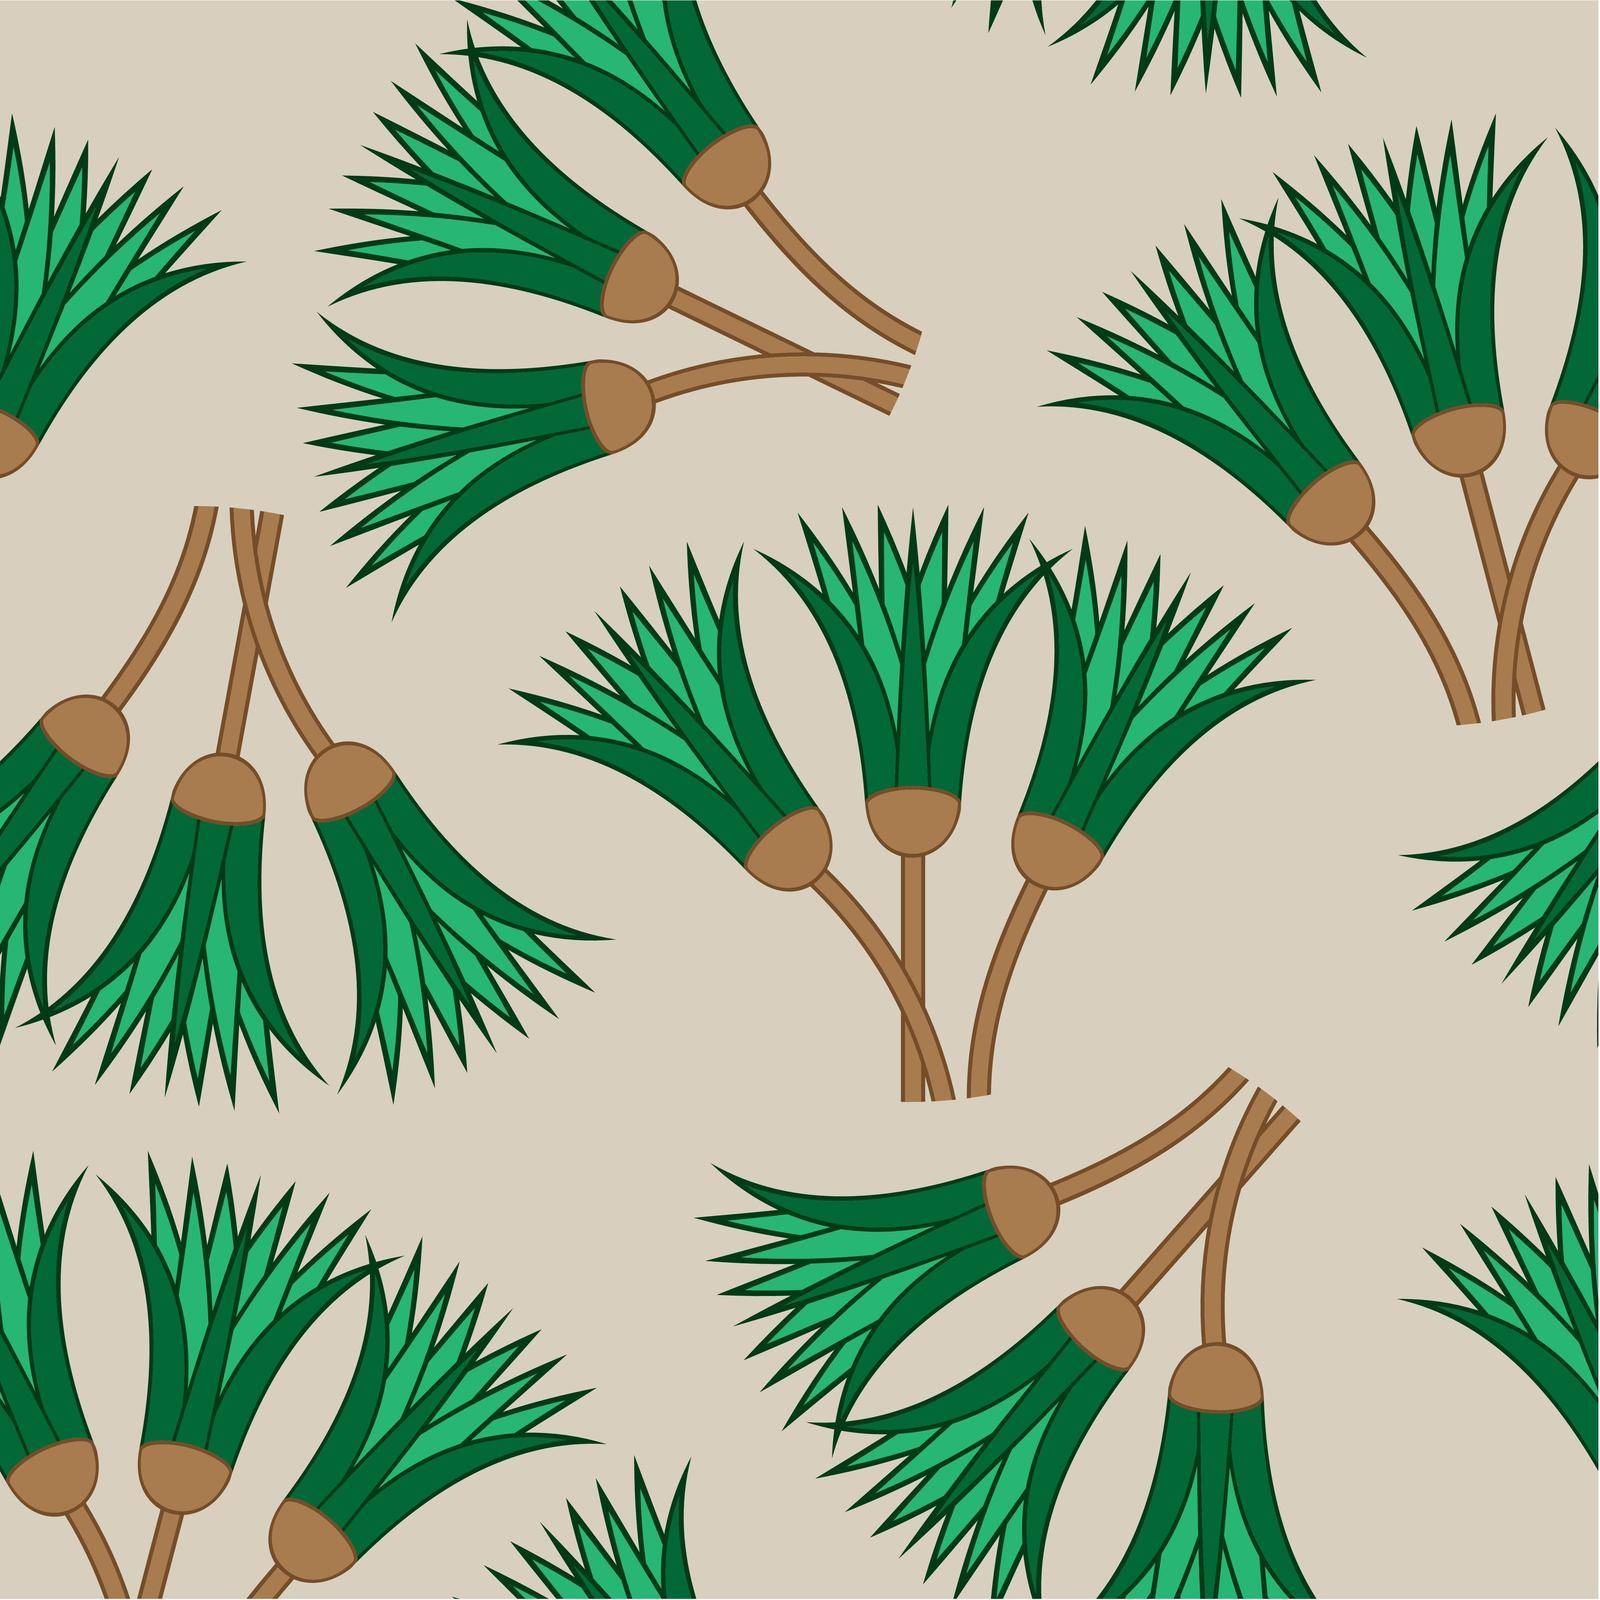 Papyrus plant shaft texture. Ornamental background cane stems element of Ancient Egypt. Vector and illustration.